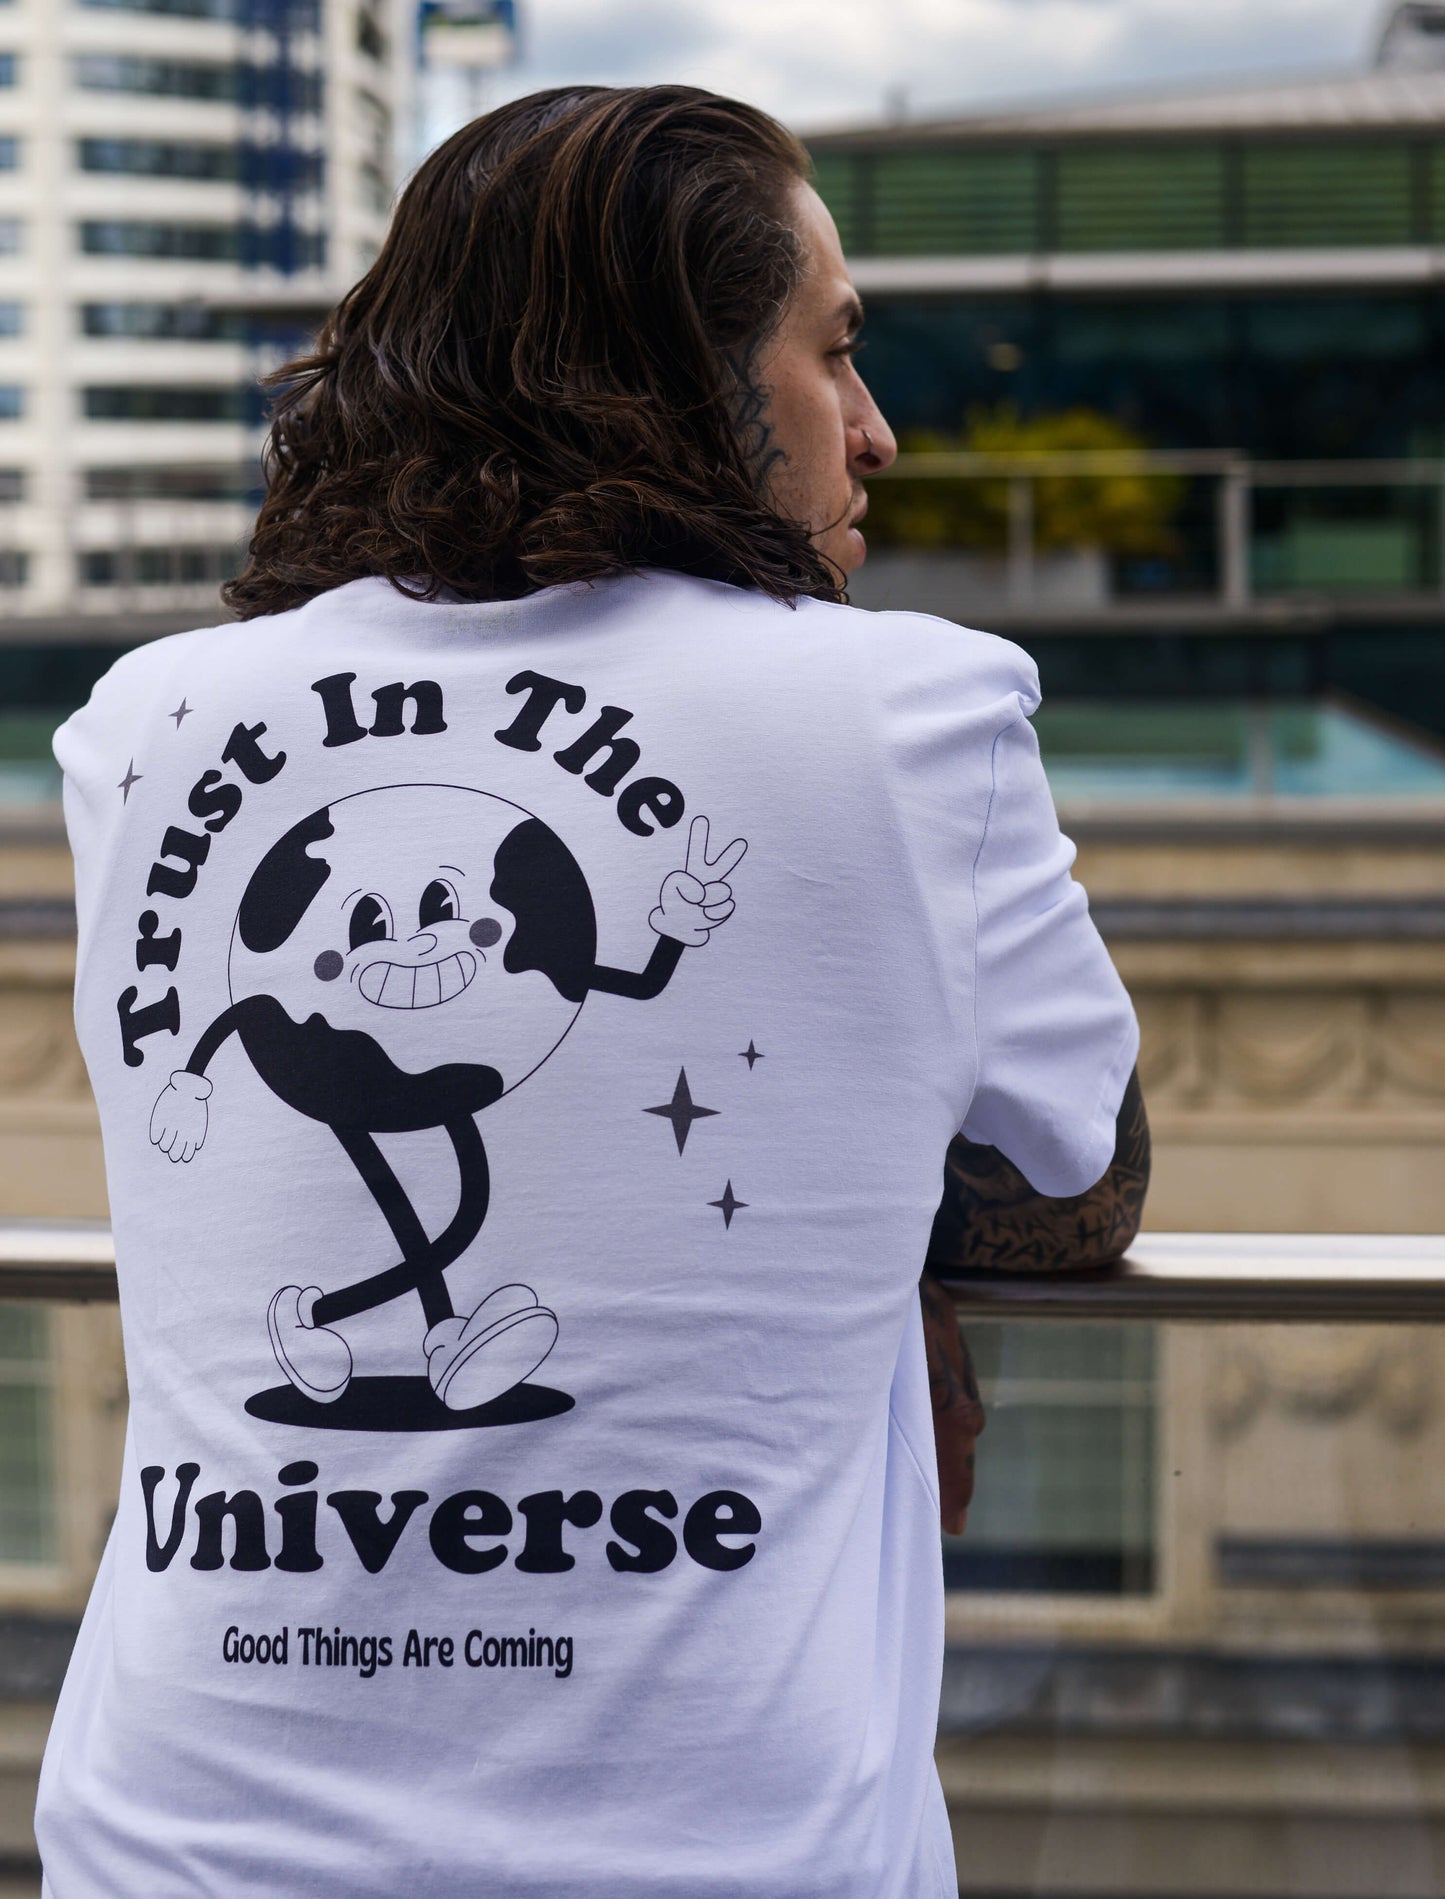 Trust in the universe tee, positive t-shirt, affirmation clothing, streetwear, unisex clothing. Man with tattoos 